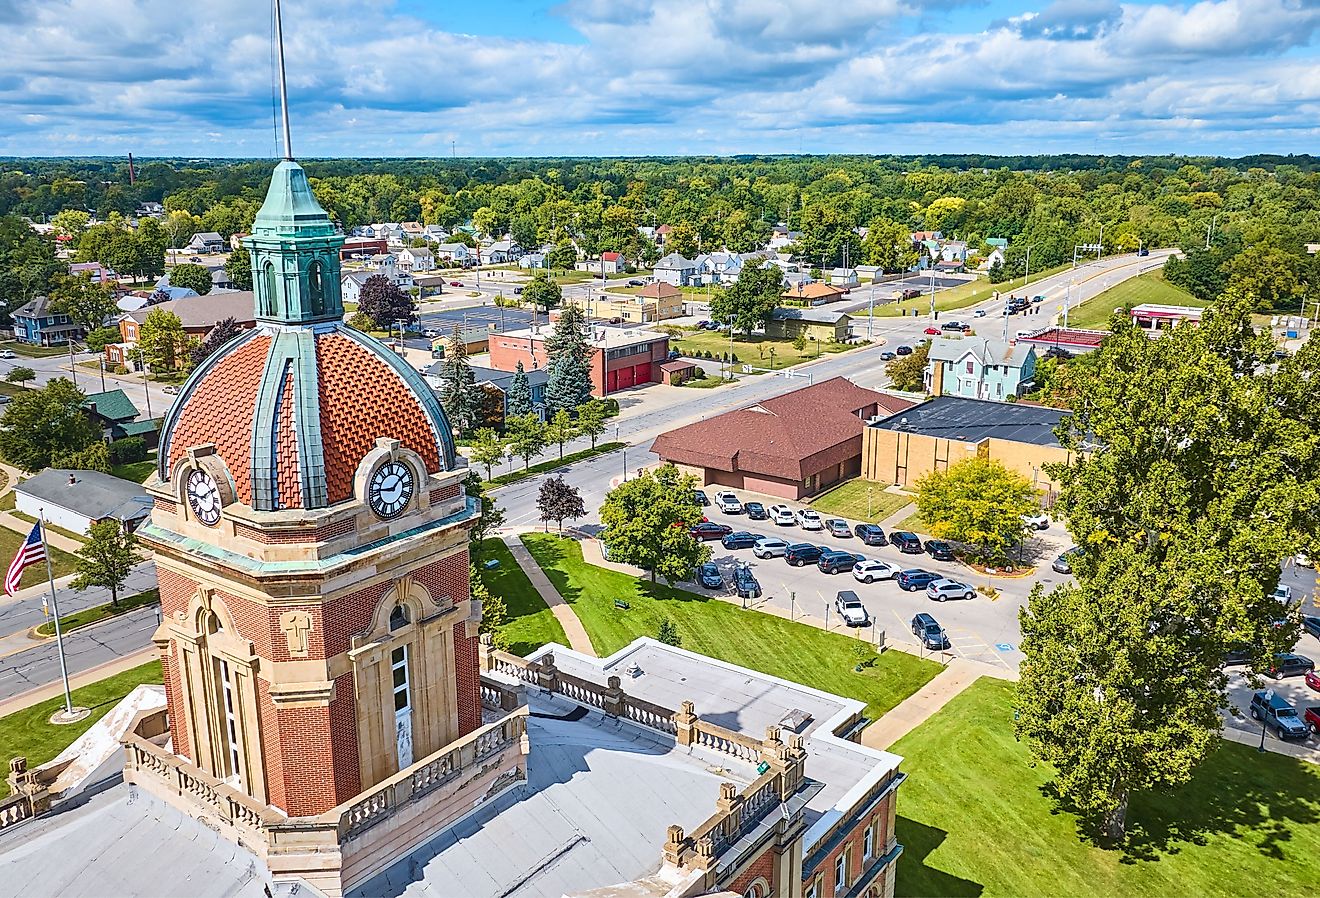 Aerial view of Elkhart Courthouse and suburban townscape of Goshen, Indiana.